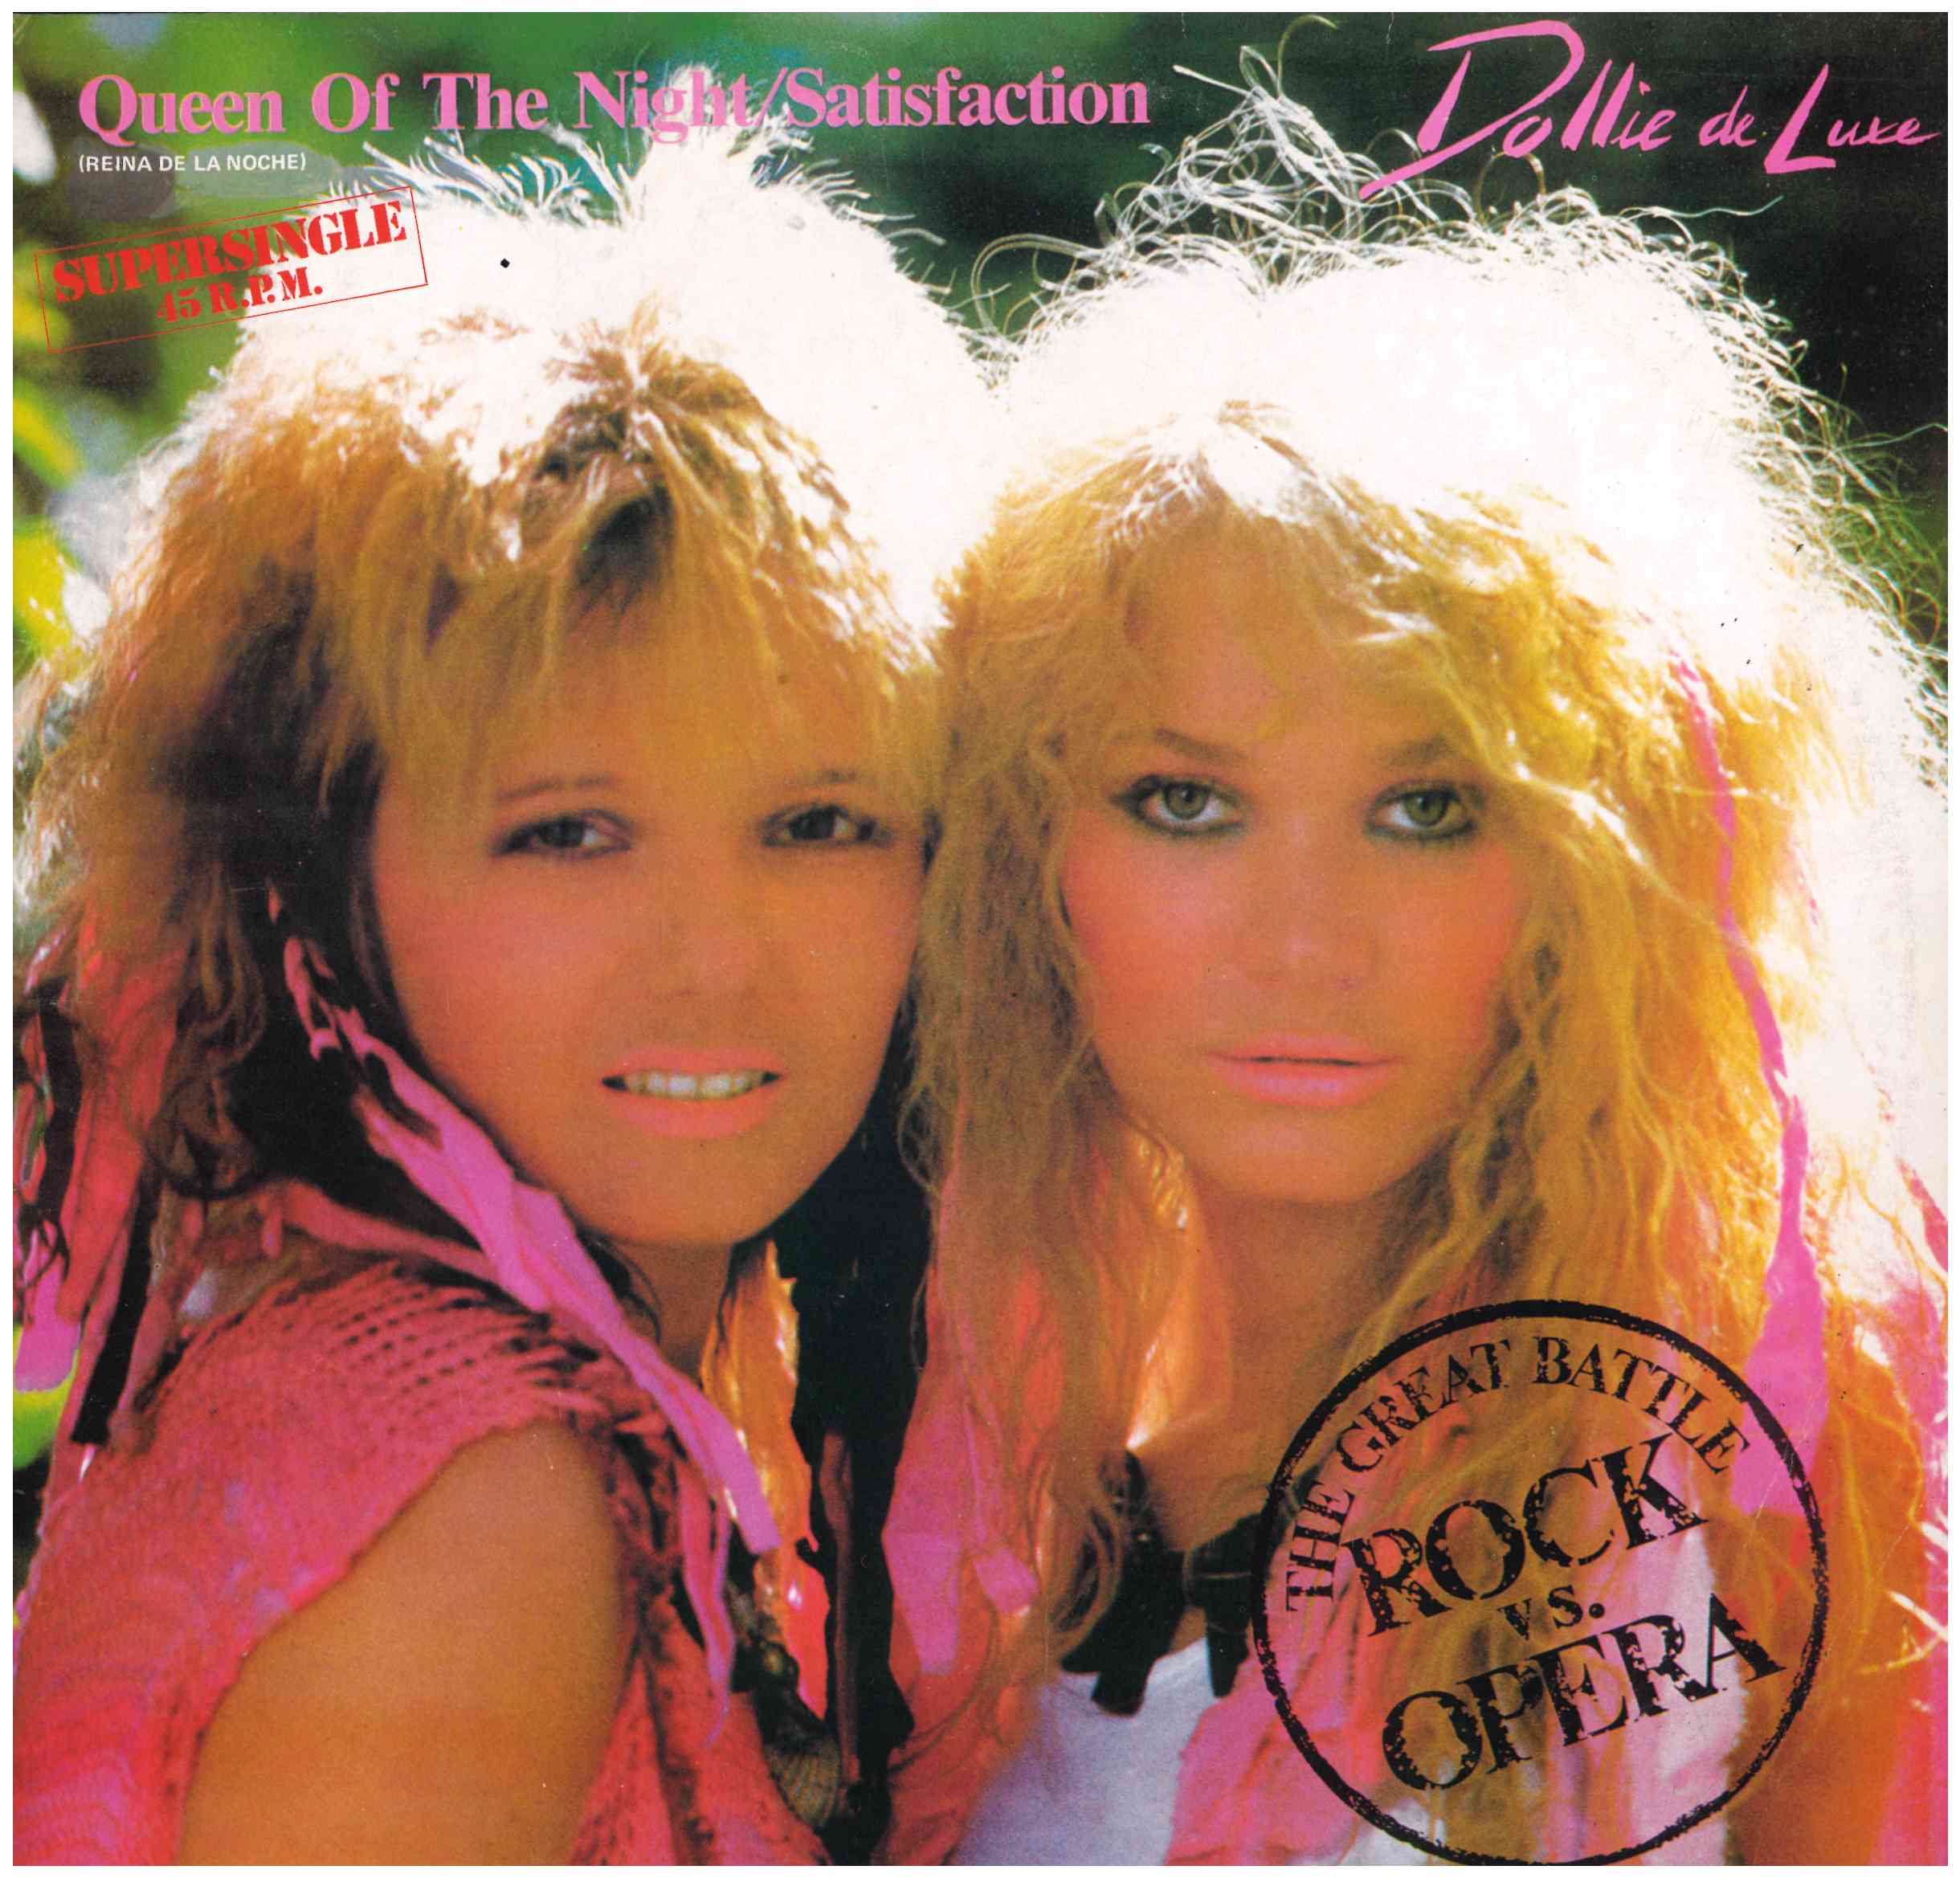 Dollie de Luxe. Queen of the night - Satisfaction / On top again. Columbia 1984 (CPT-52505) Maxisingle